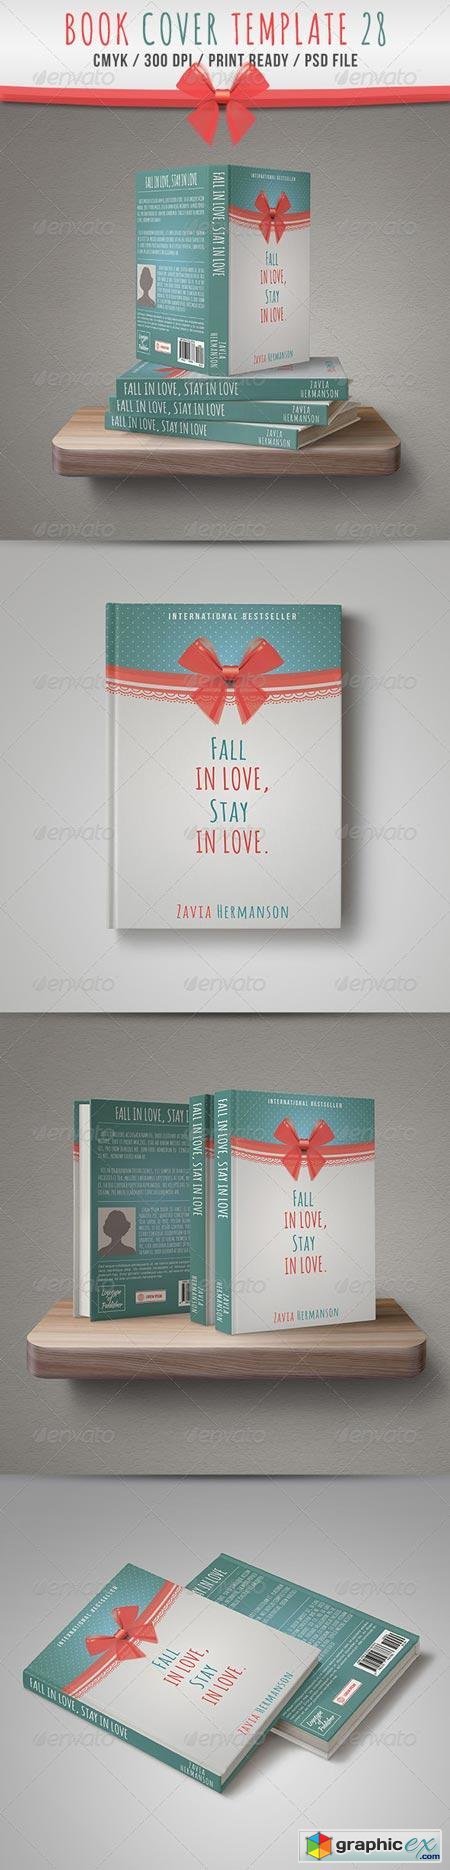 Book Cover Template 28 7790166